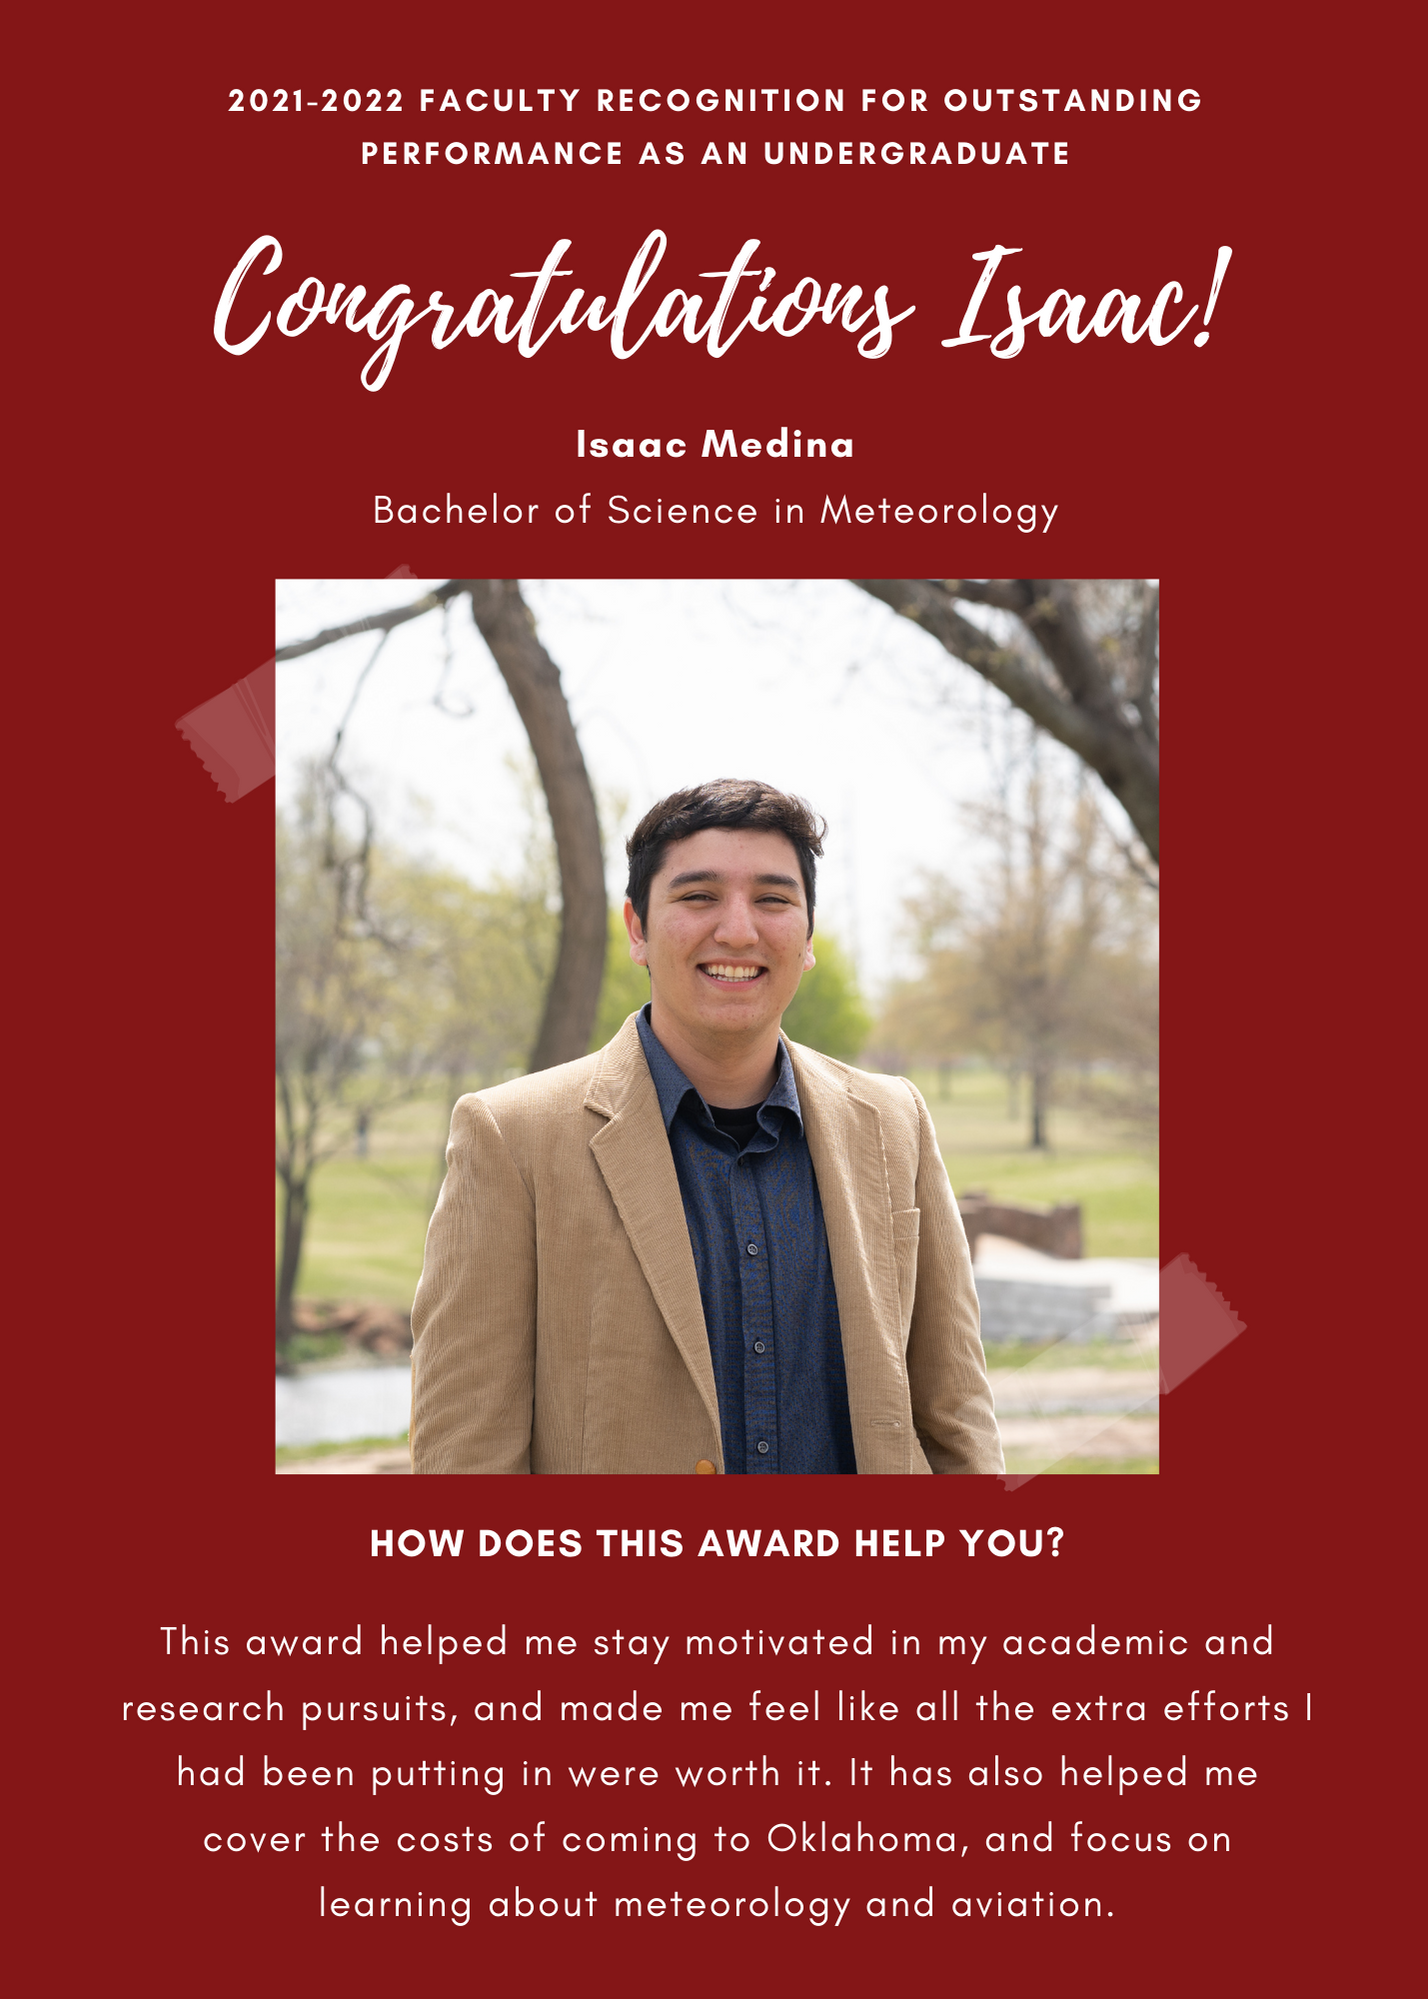 A&GS 21-22  Faculty recognition for Outstanding Performance as an Undergraduate. Congratulations Isaac ! Isaac Medina Bachelor of Science in Meteorology. How does this award help you?This award helped me stay motivated in my academic and research pursuits, and made me feel like all the extra efforts I had been putting in were worth it. it has also helped me cover the costs of coming to Oklahoma, and focus on learning about meteorology and aviation.